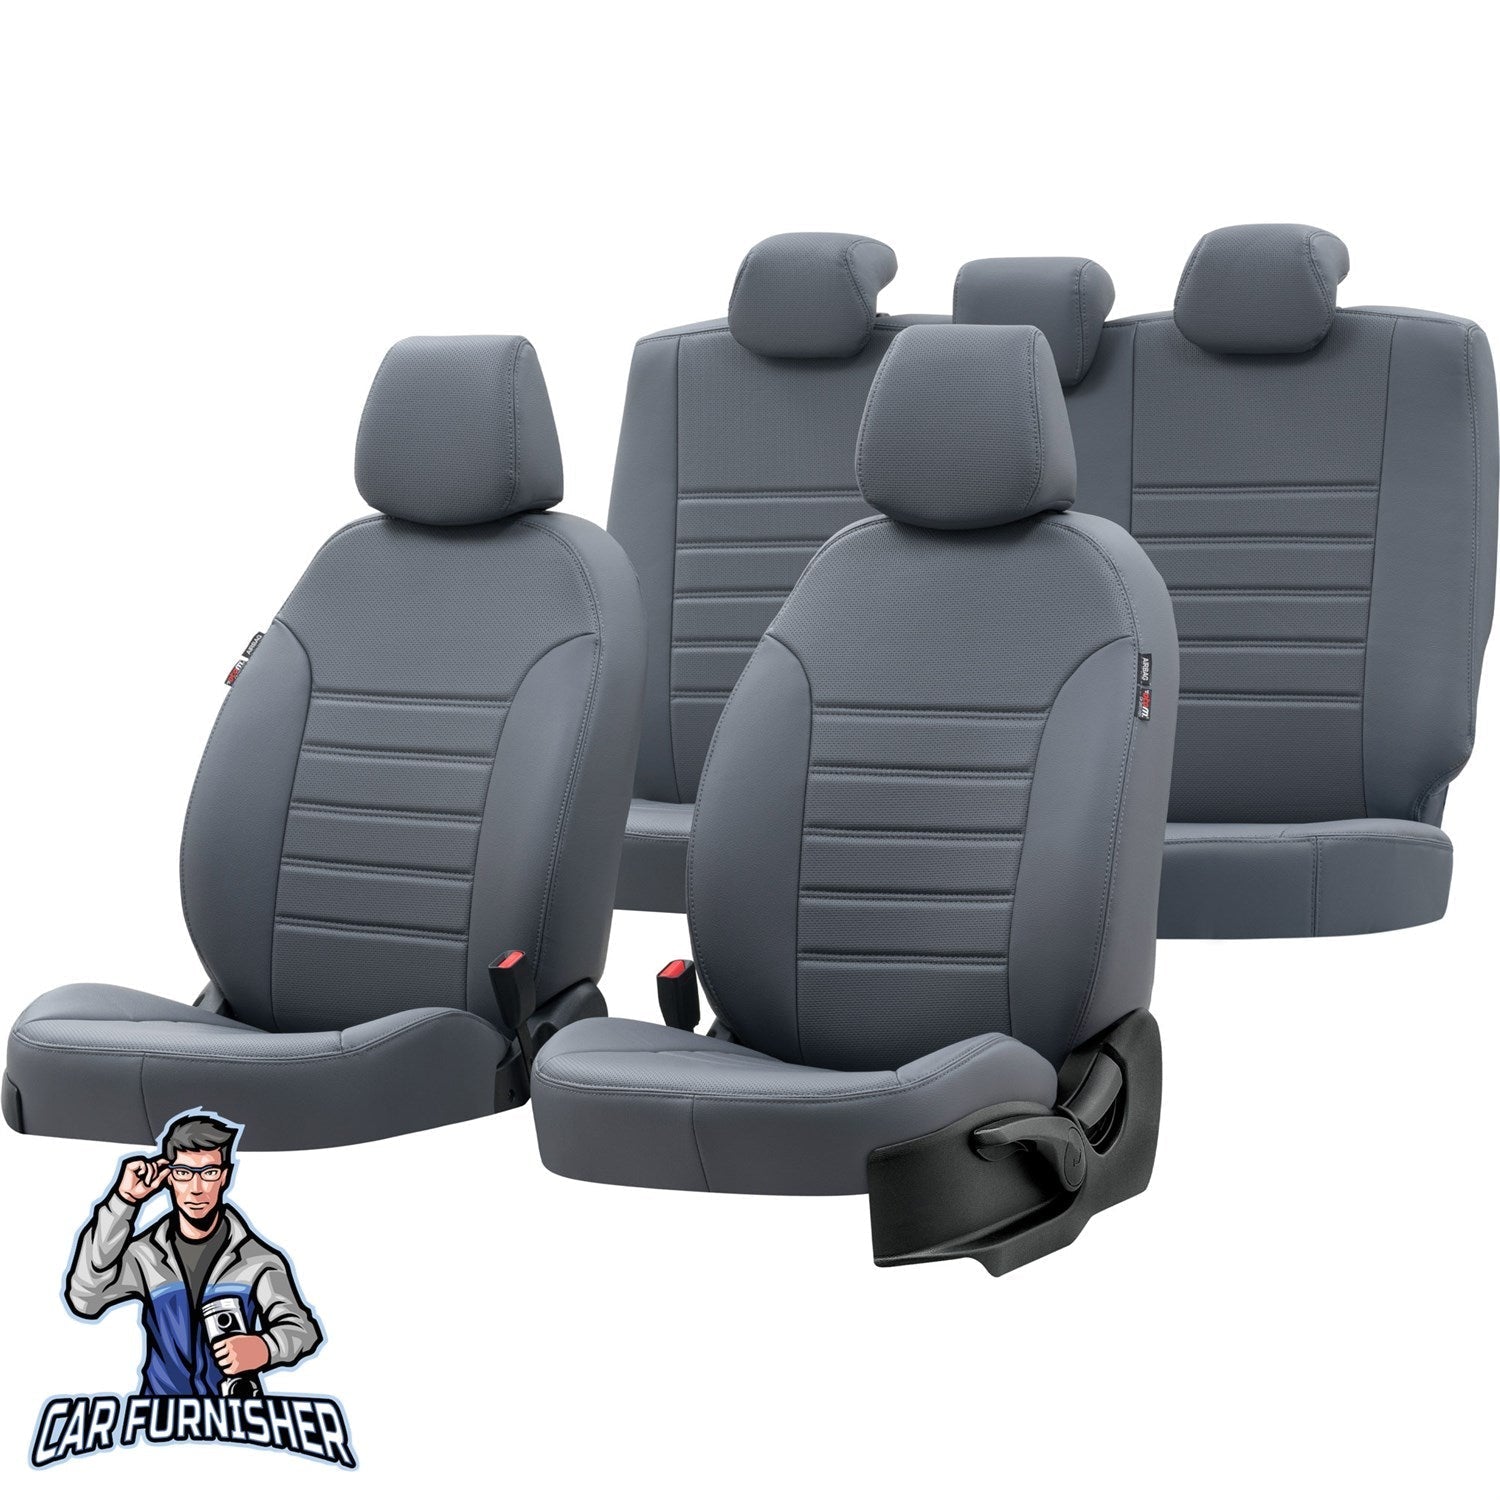 Isuzu L35 Seat Cover New York Leather Design Smoked Leather